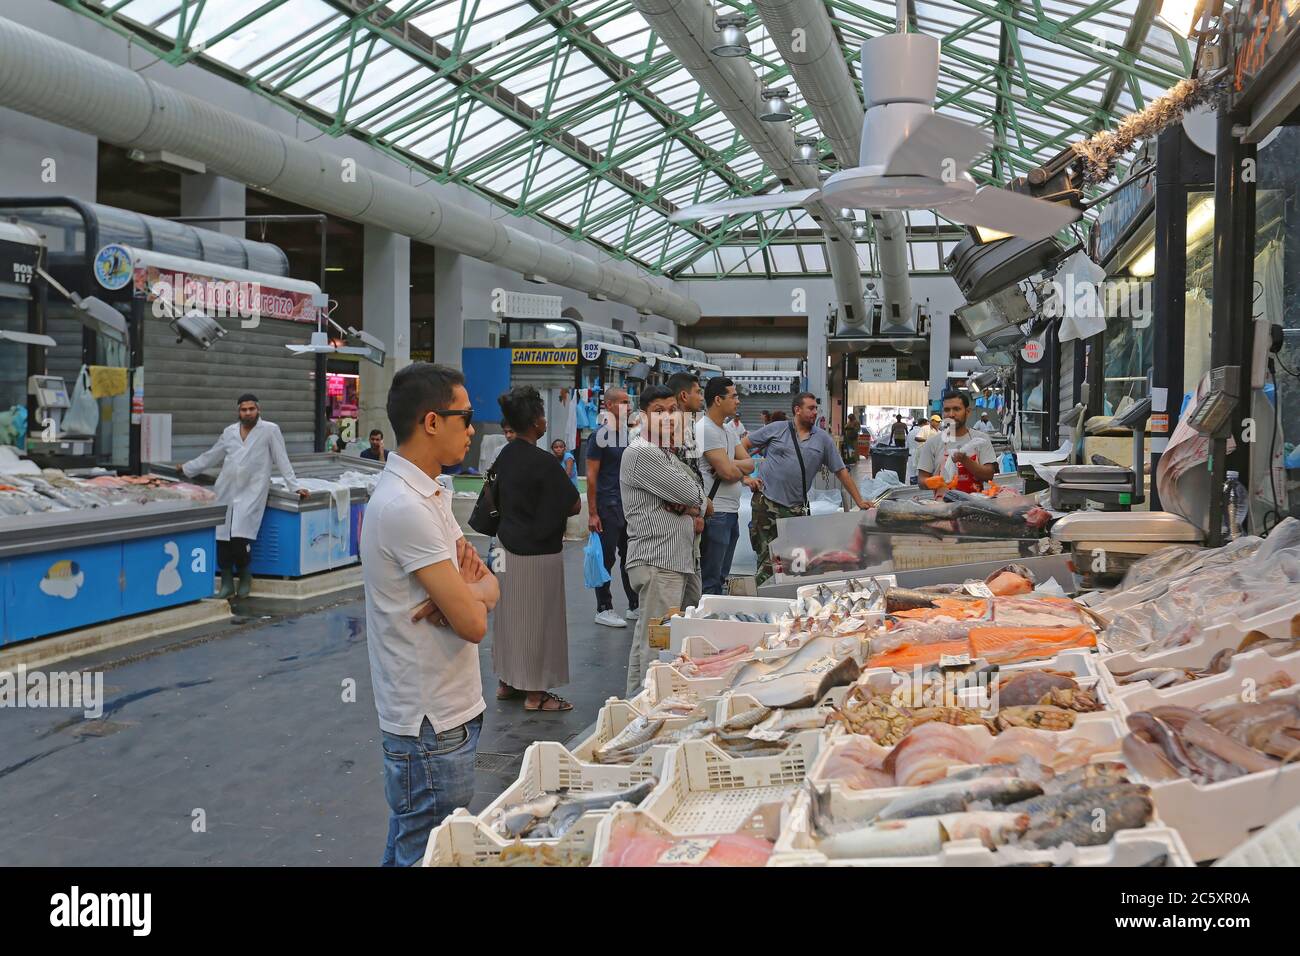 Rome Italy June 30 14 Fishmongers And Shoppers At Fish Market Near Termini Station In Rome Italy Stock Photo Alamy